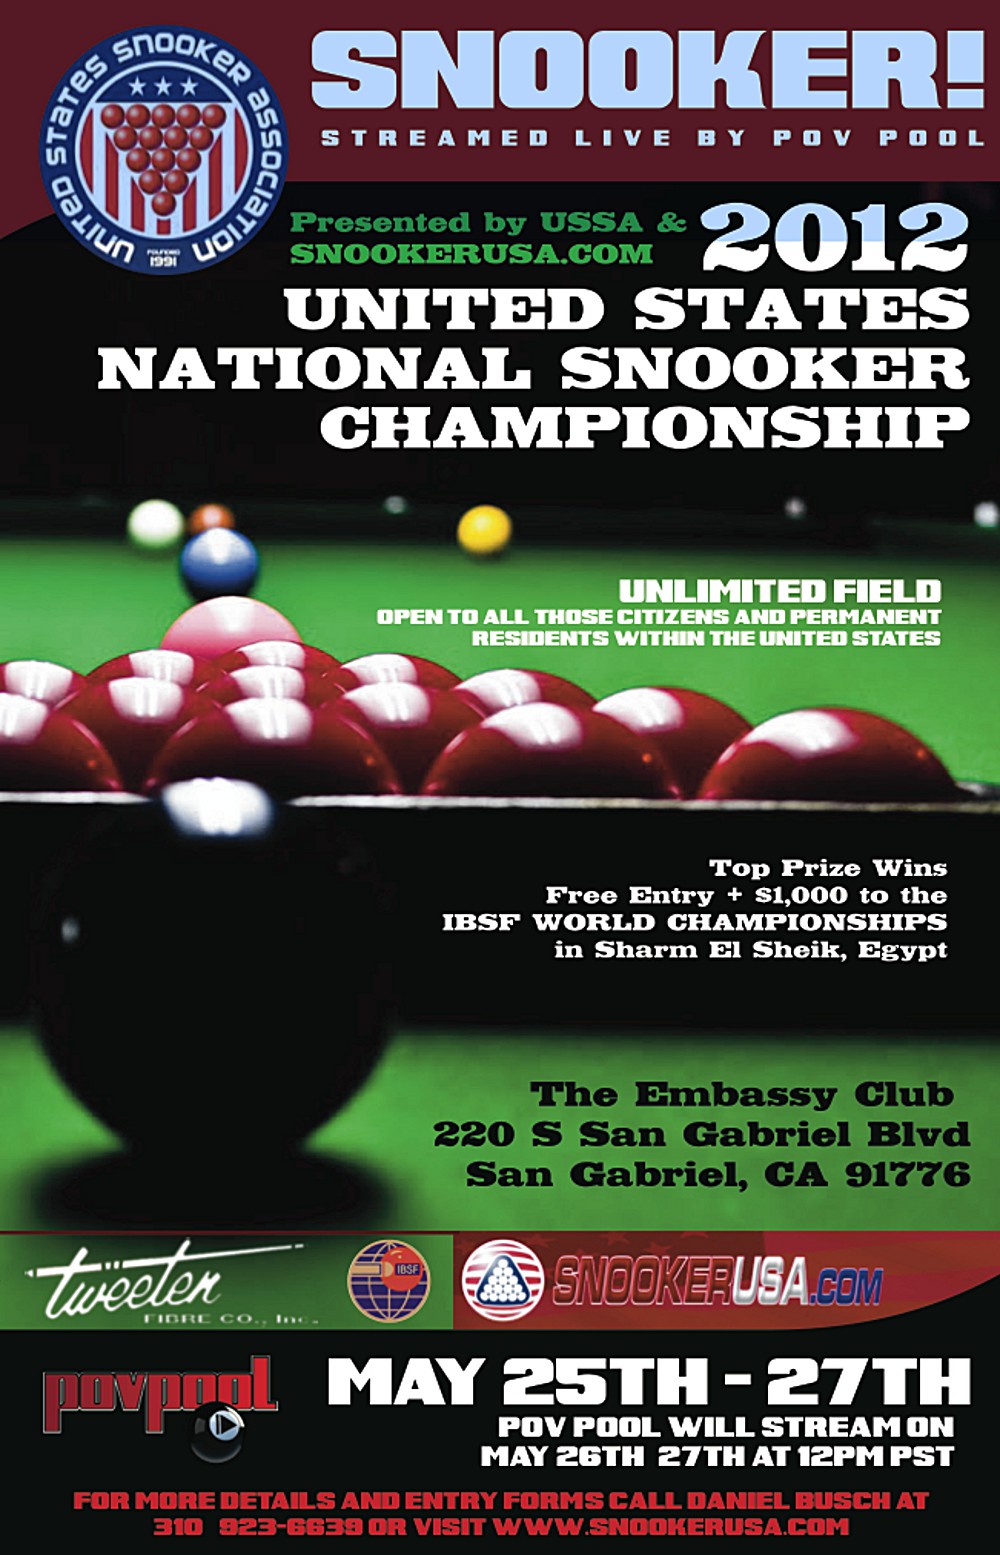 The 1st Ever Live Stream Of Snooker From The U.S.